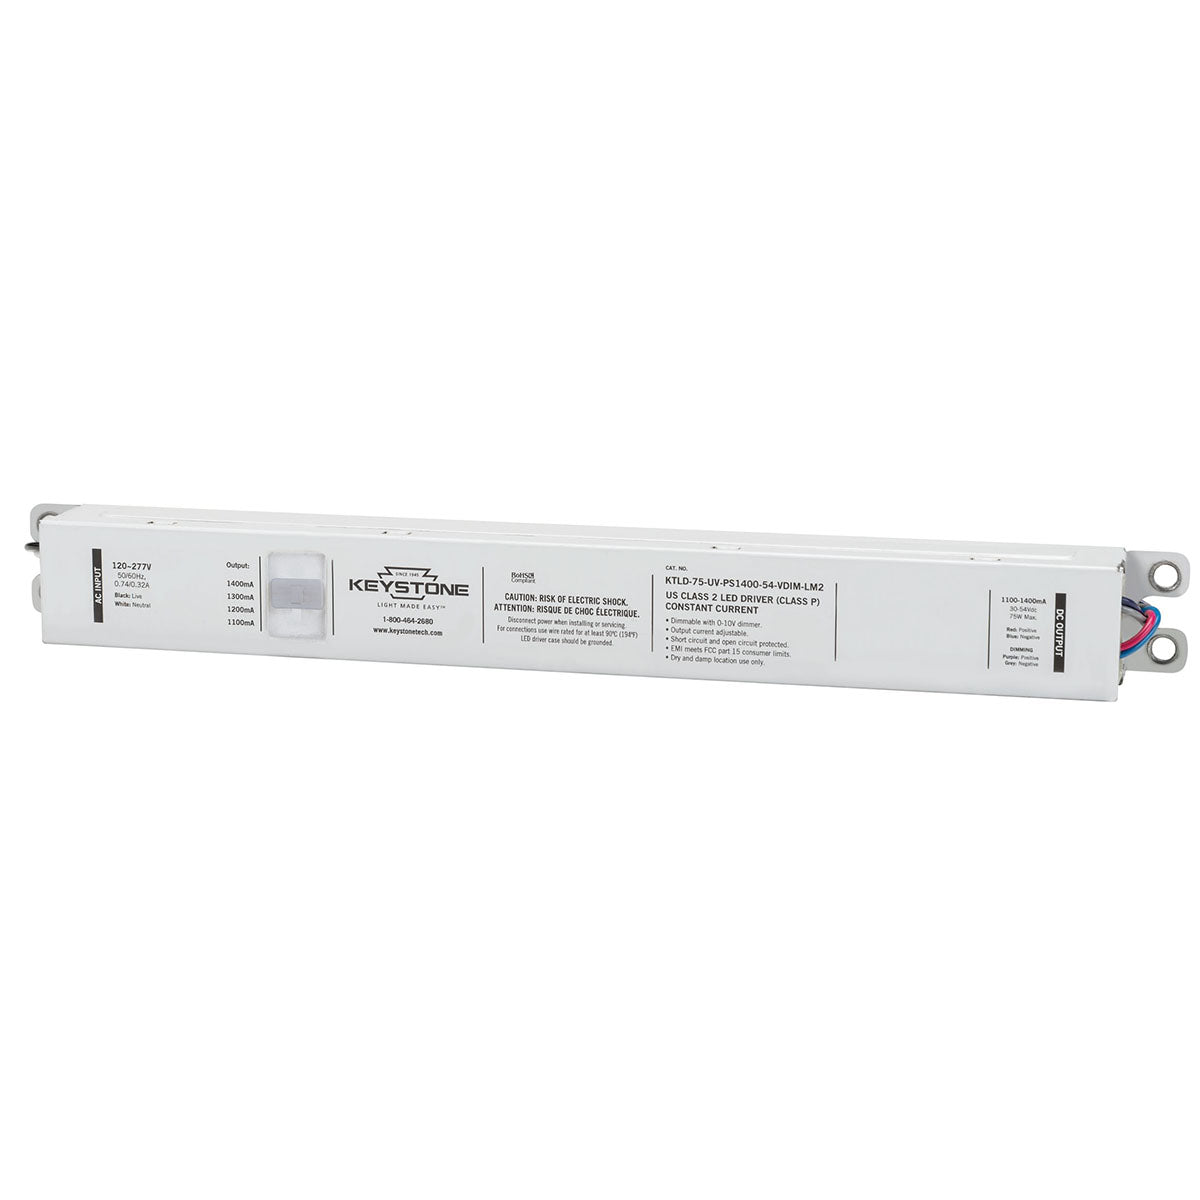 Power Select LED Driver, 75W, Adjustable Constant Current 1100-1400mA, 0-10V Dimming, 120-277V Input